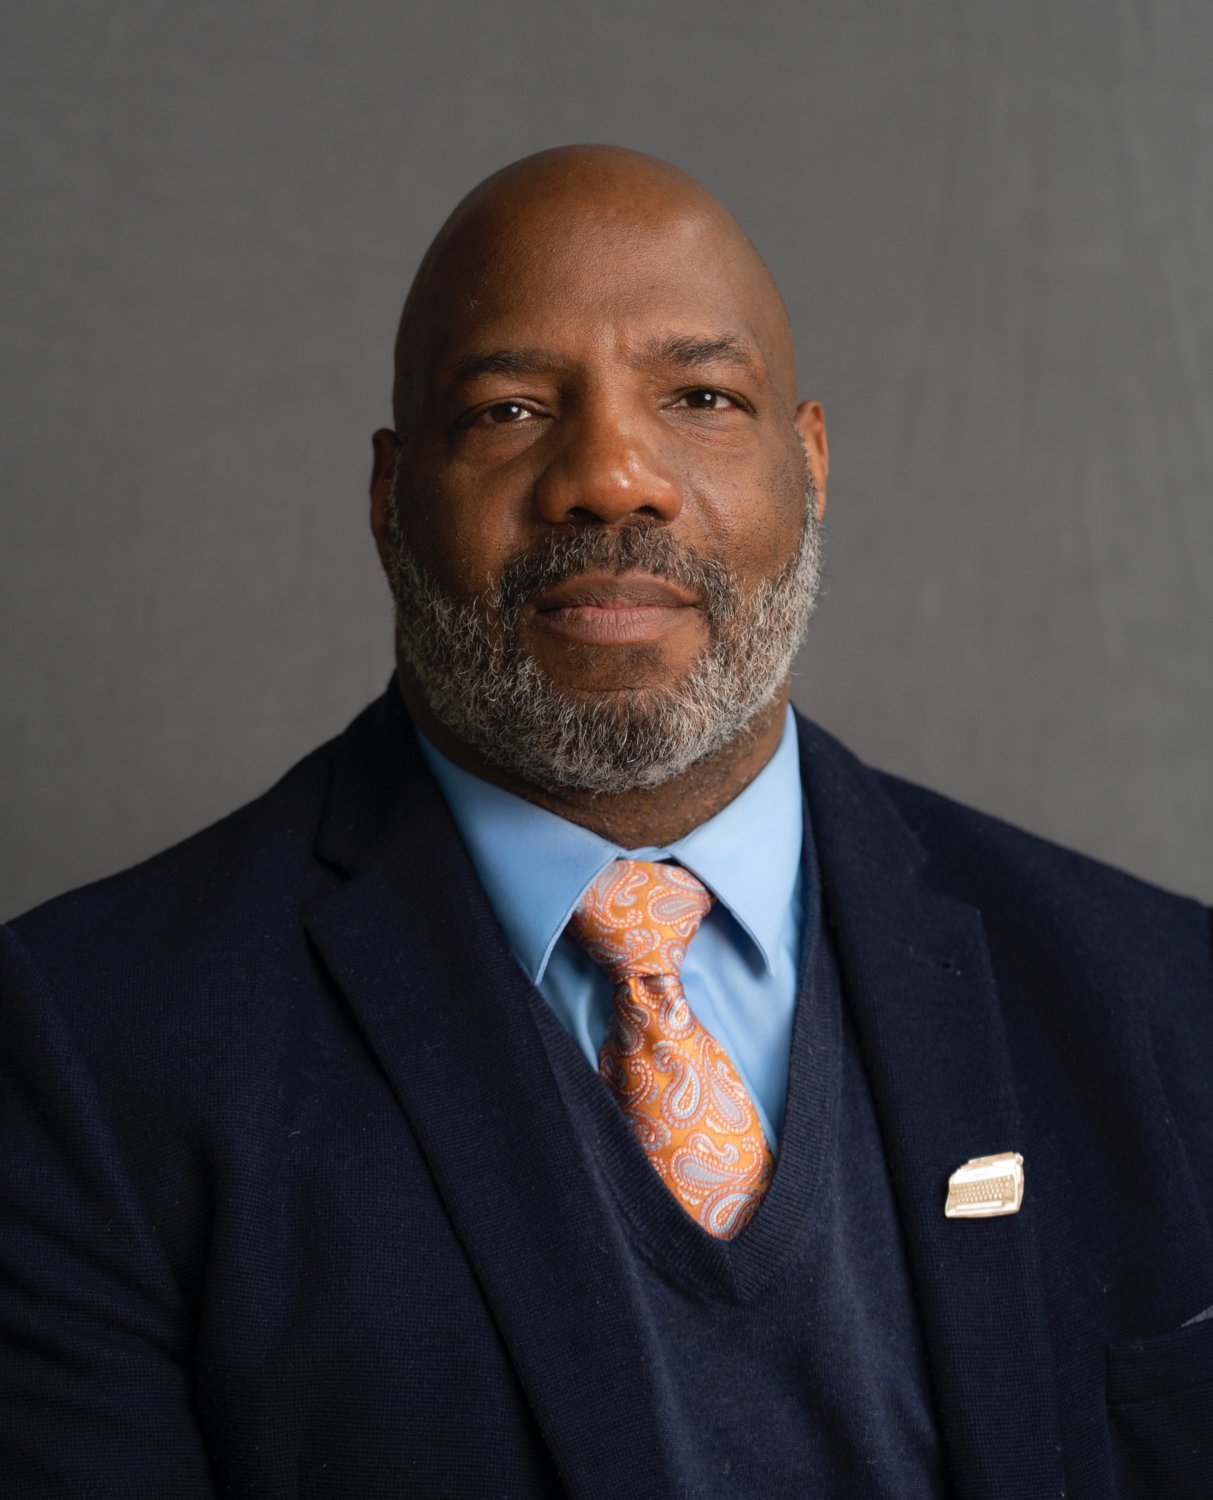 Dr. Jelani Cobb believes that journalism functions in tandem with democracy.